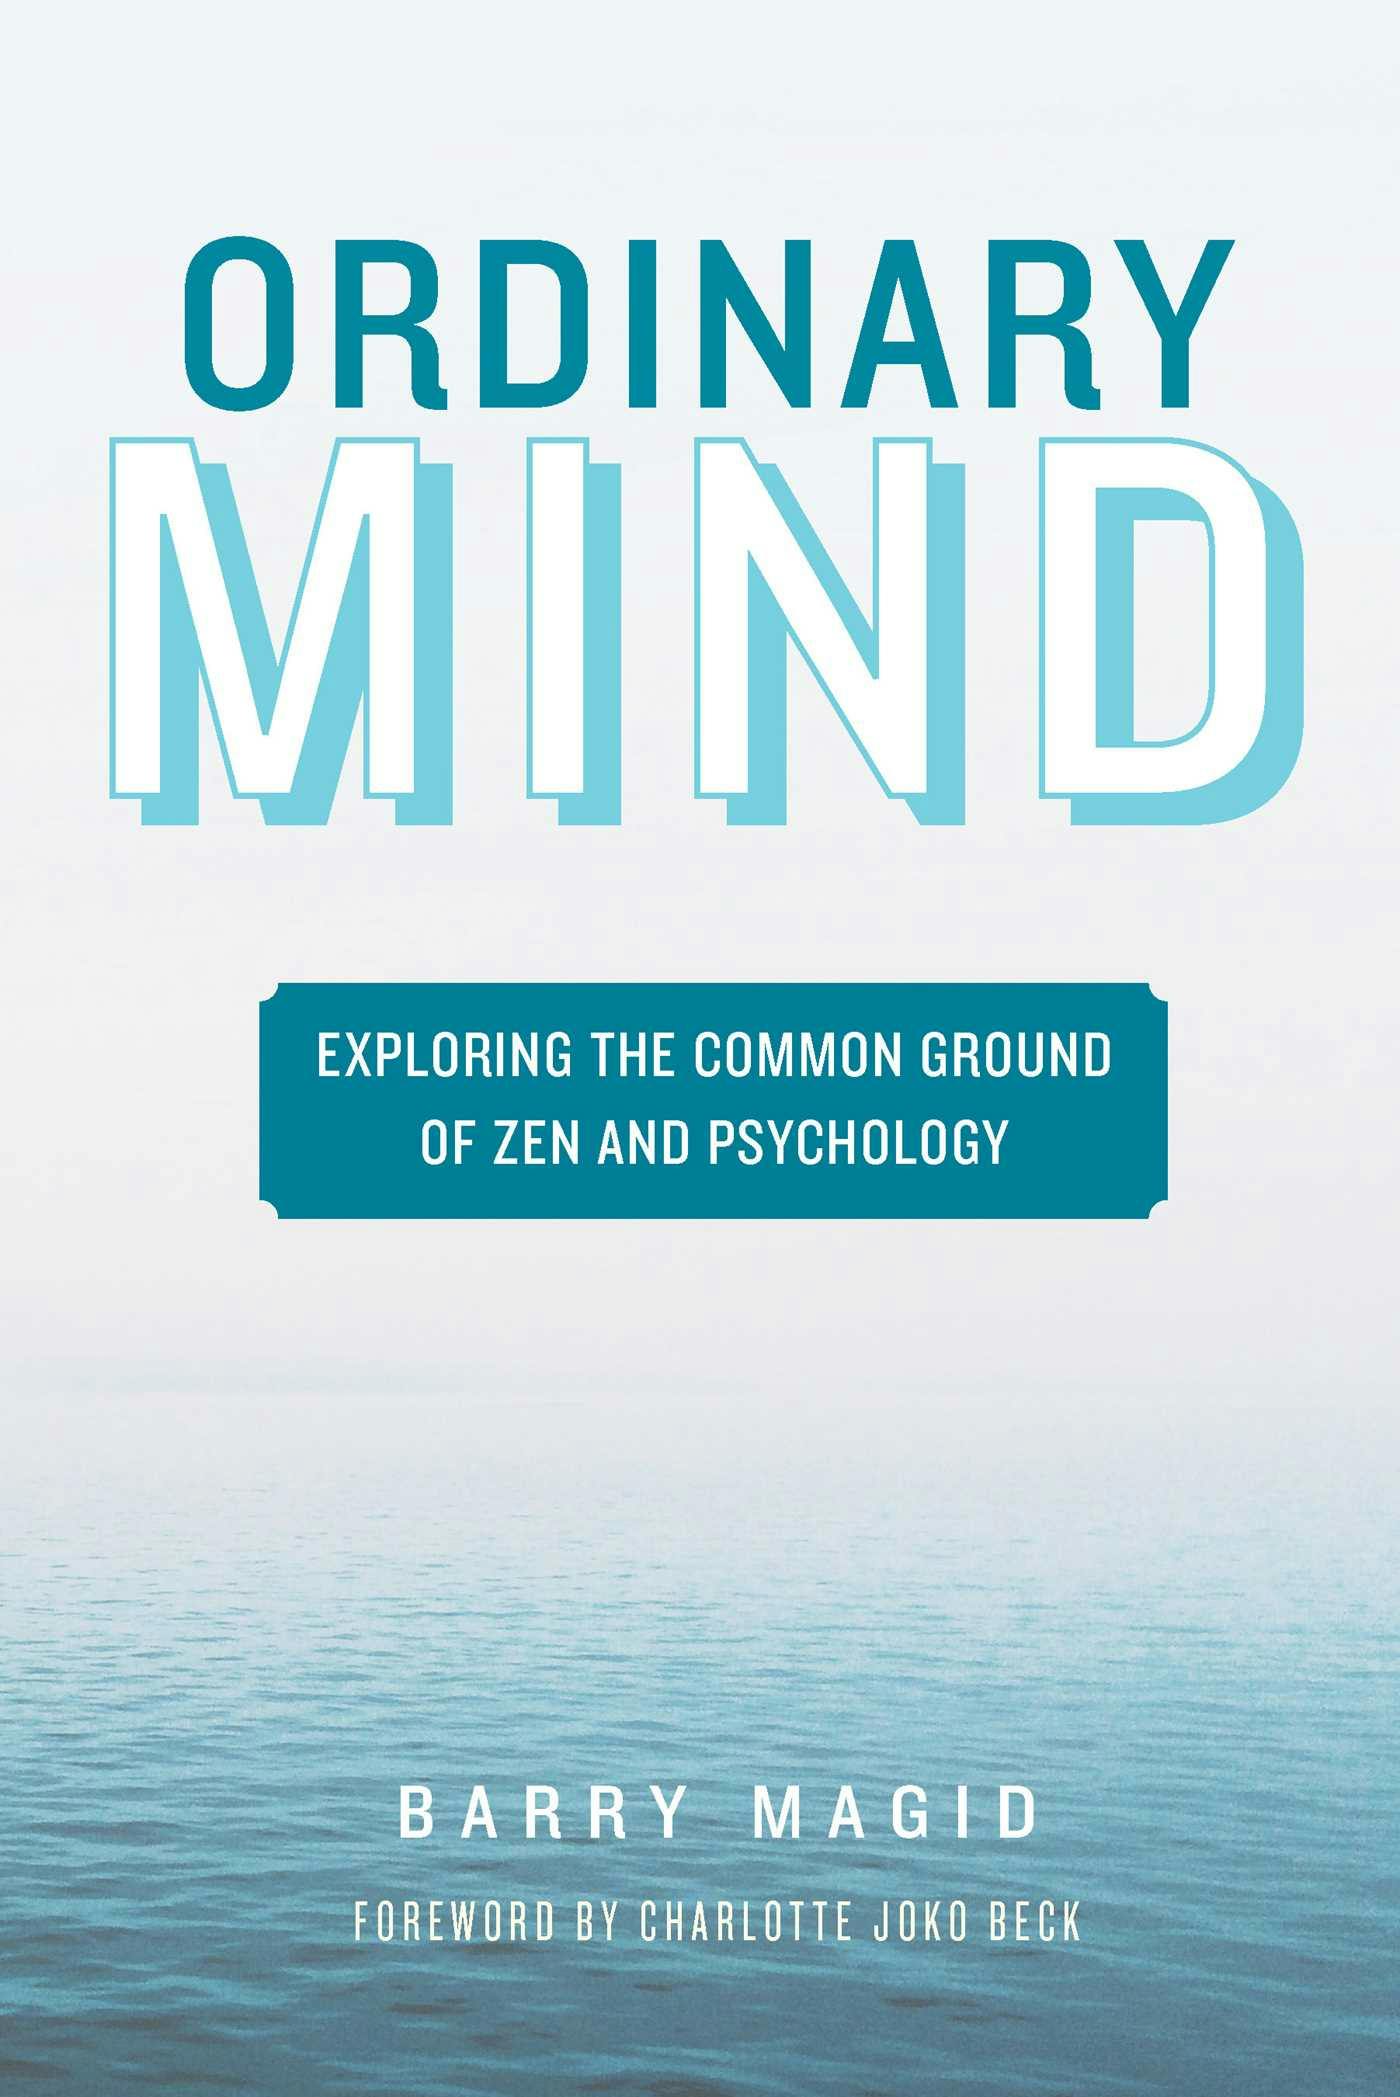 Ordinary Mind: Exploring the Common Ground of Zen and Psychoanalysis - Barry Magid